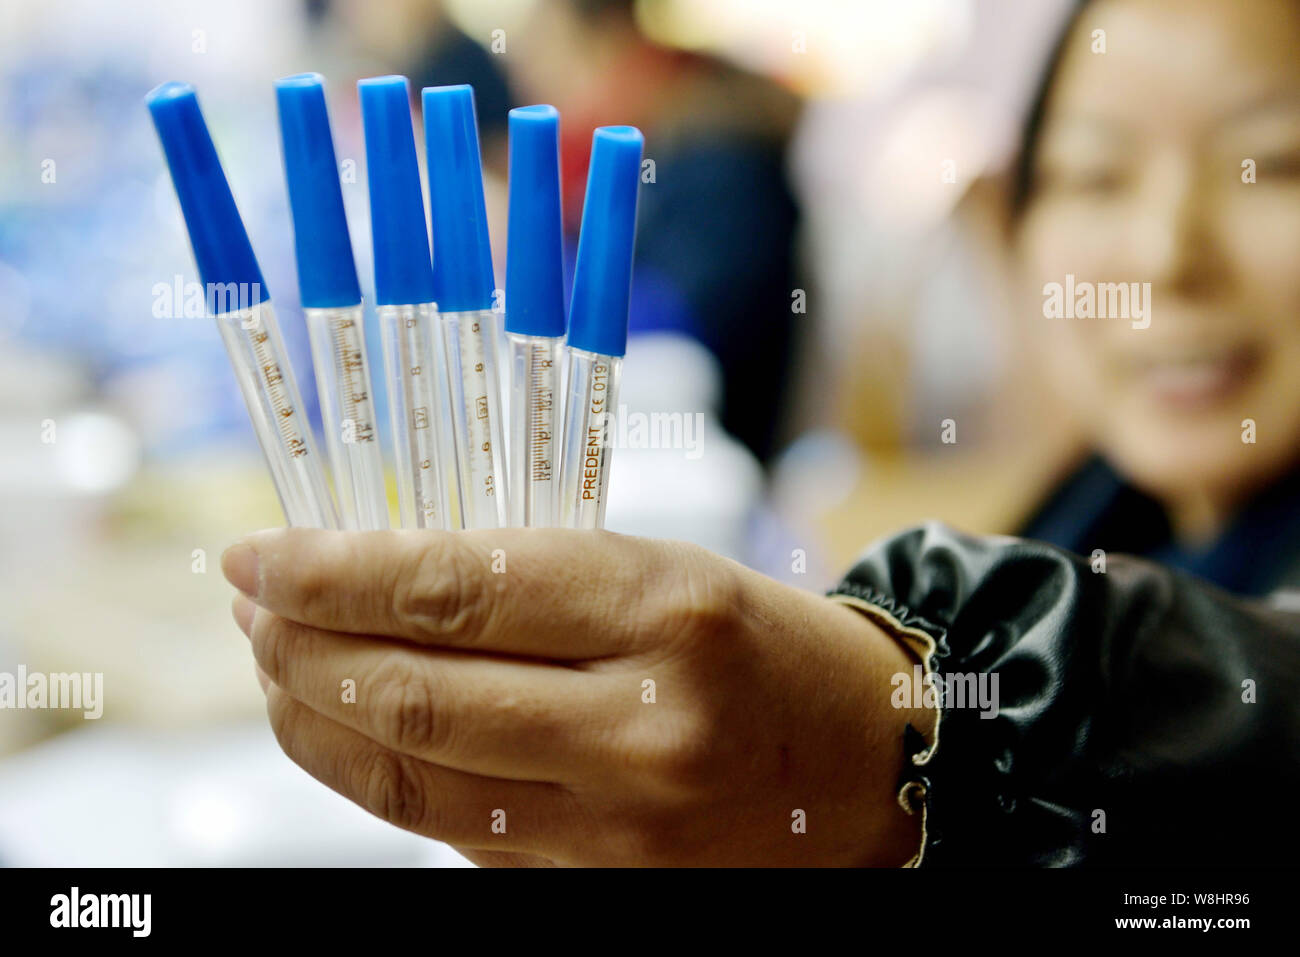 A Chinese worker shows finished mercury-in-glass thermometers at the plant of Jiangsu Yuyue Medical Equipment & Supply Co., Ltd. in Yancheng city, eas Stock Photo